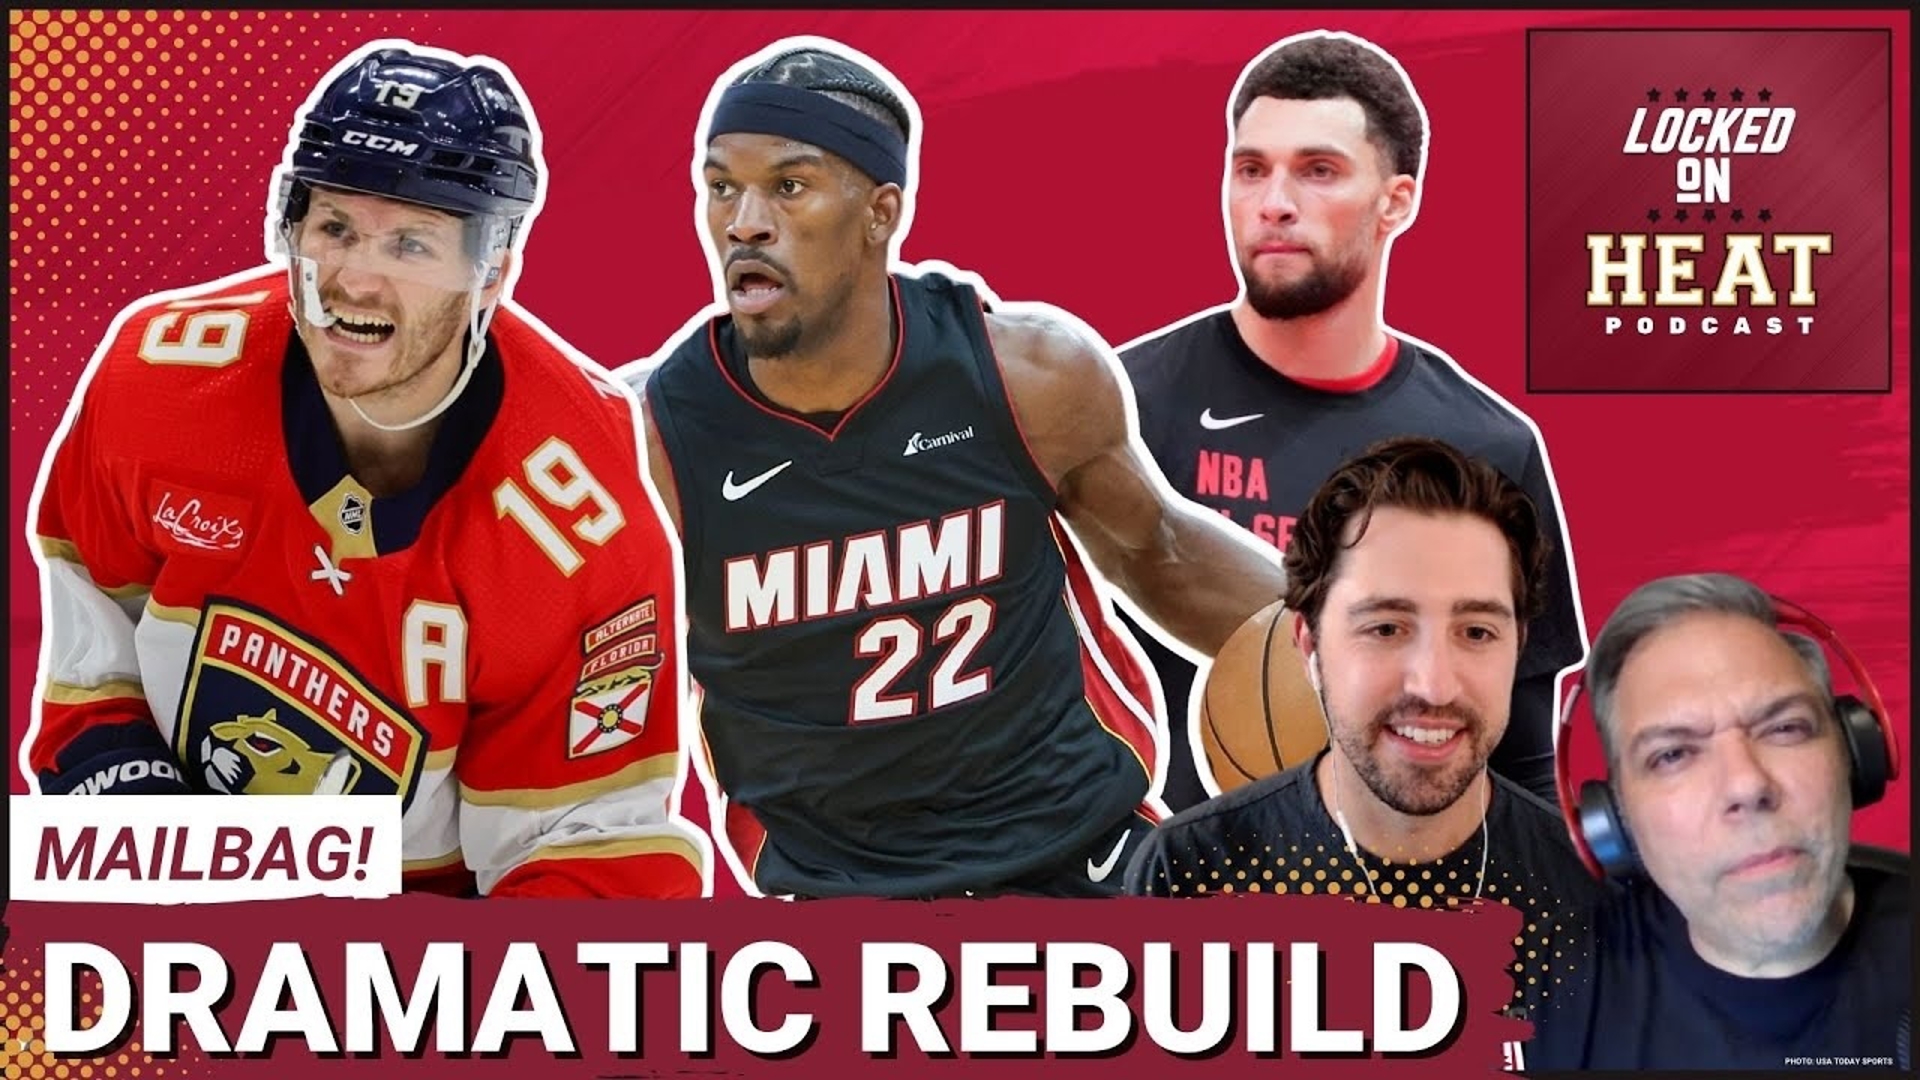 What would a Florida Panthers-like rebuild look like to keep the Miami Heat's championship window open? Who is the team's next development project?